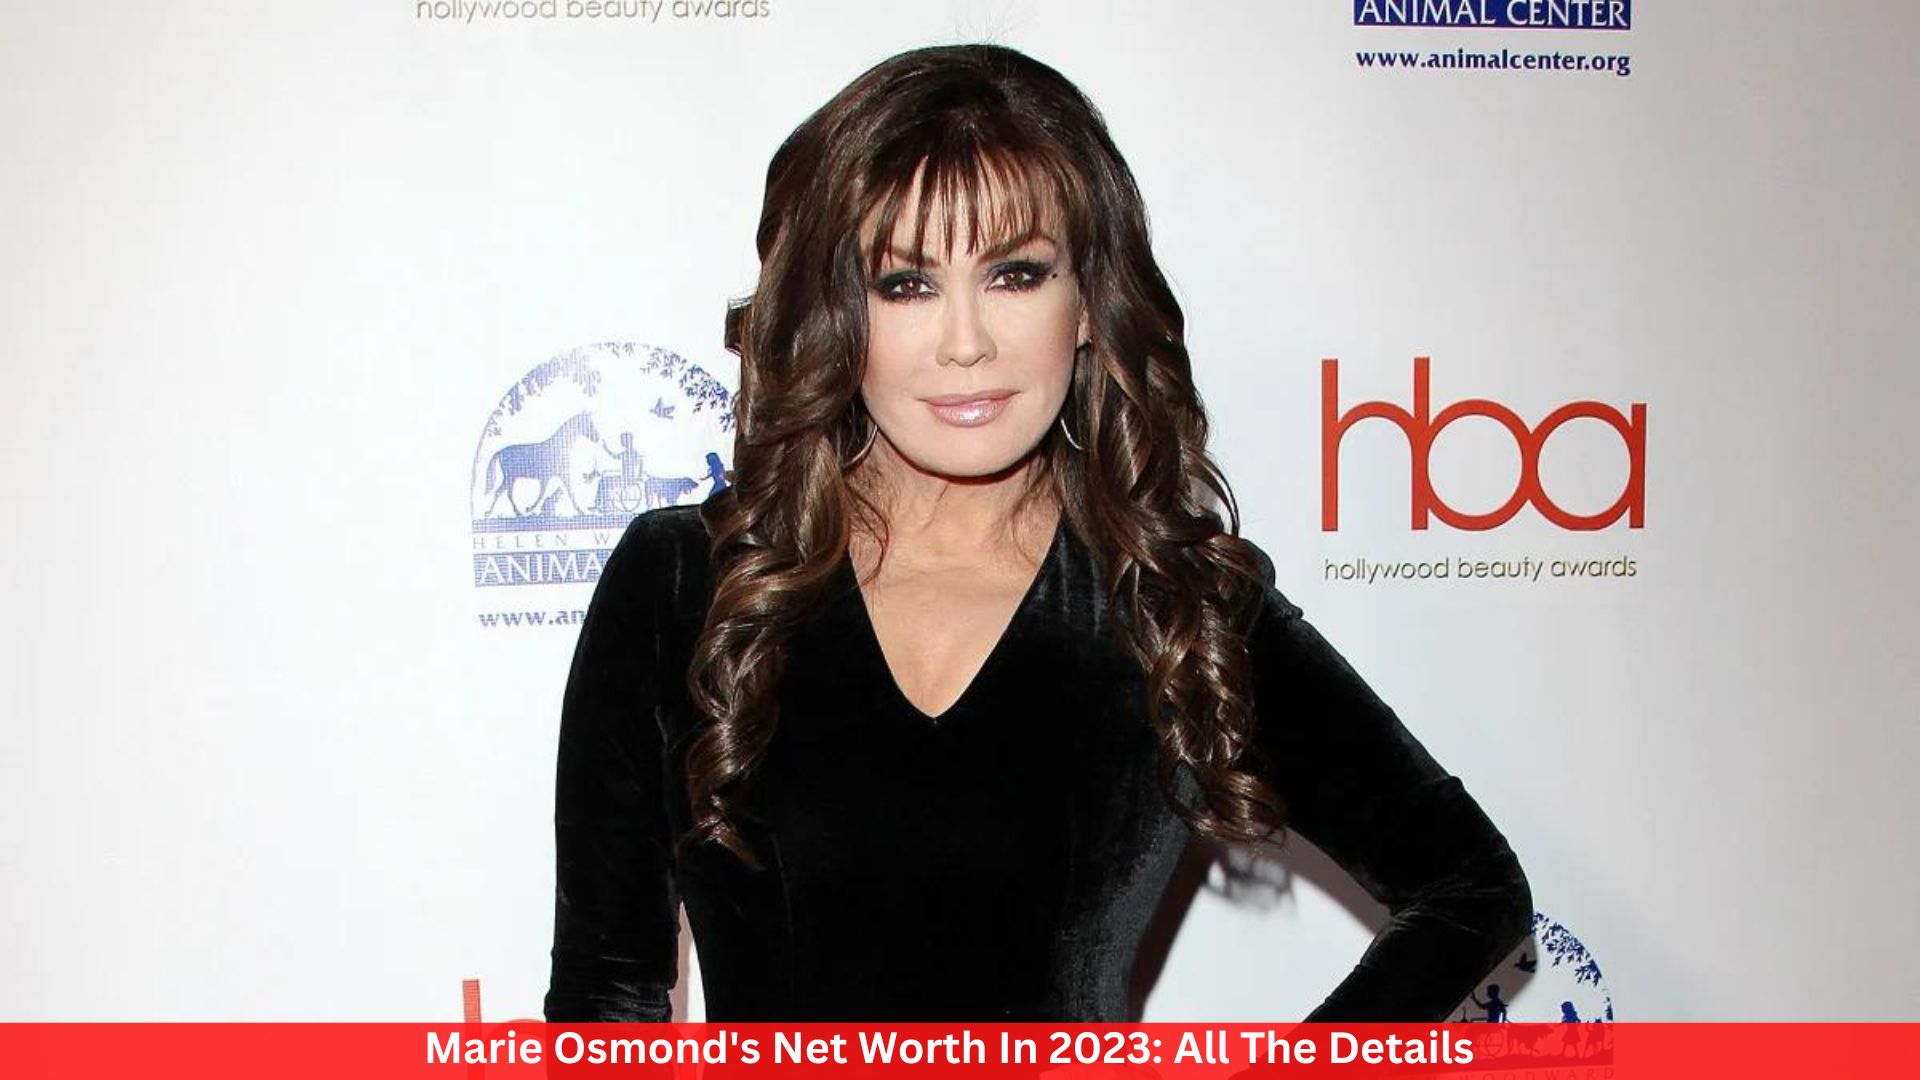 Marie Osmond's Net Worth In 2023: All The Details